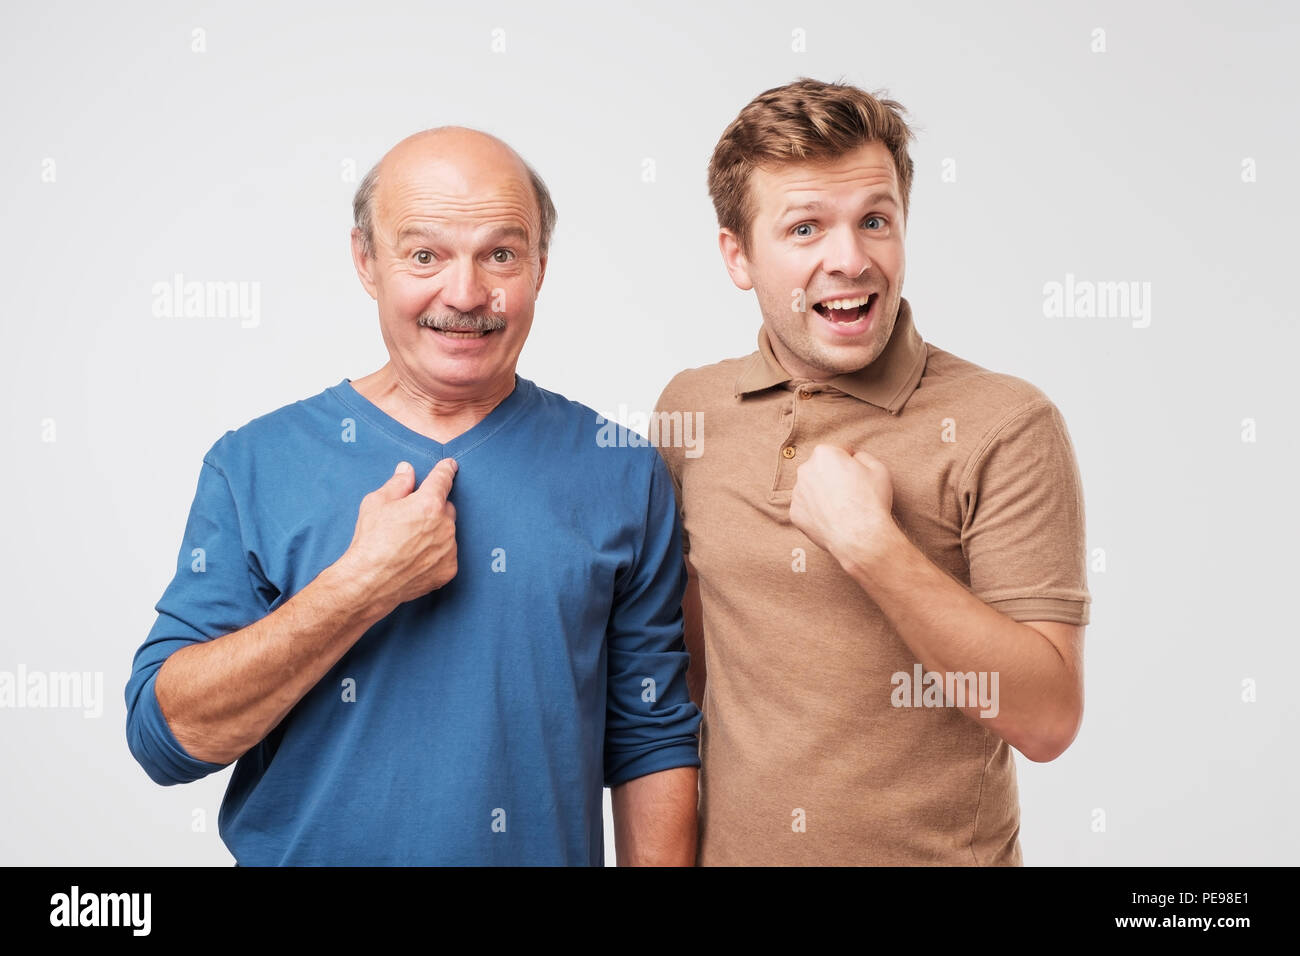 Two shocked, surprised, mature men looking asking question, you talking to me, you mean me. Select me please concept. Human emotions, facial expressio Stock Photo